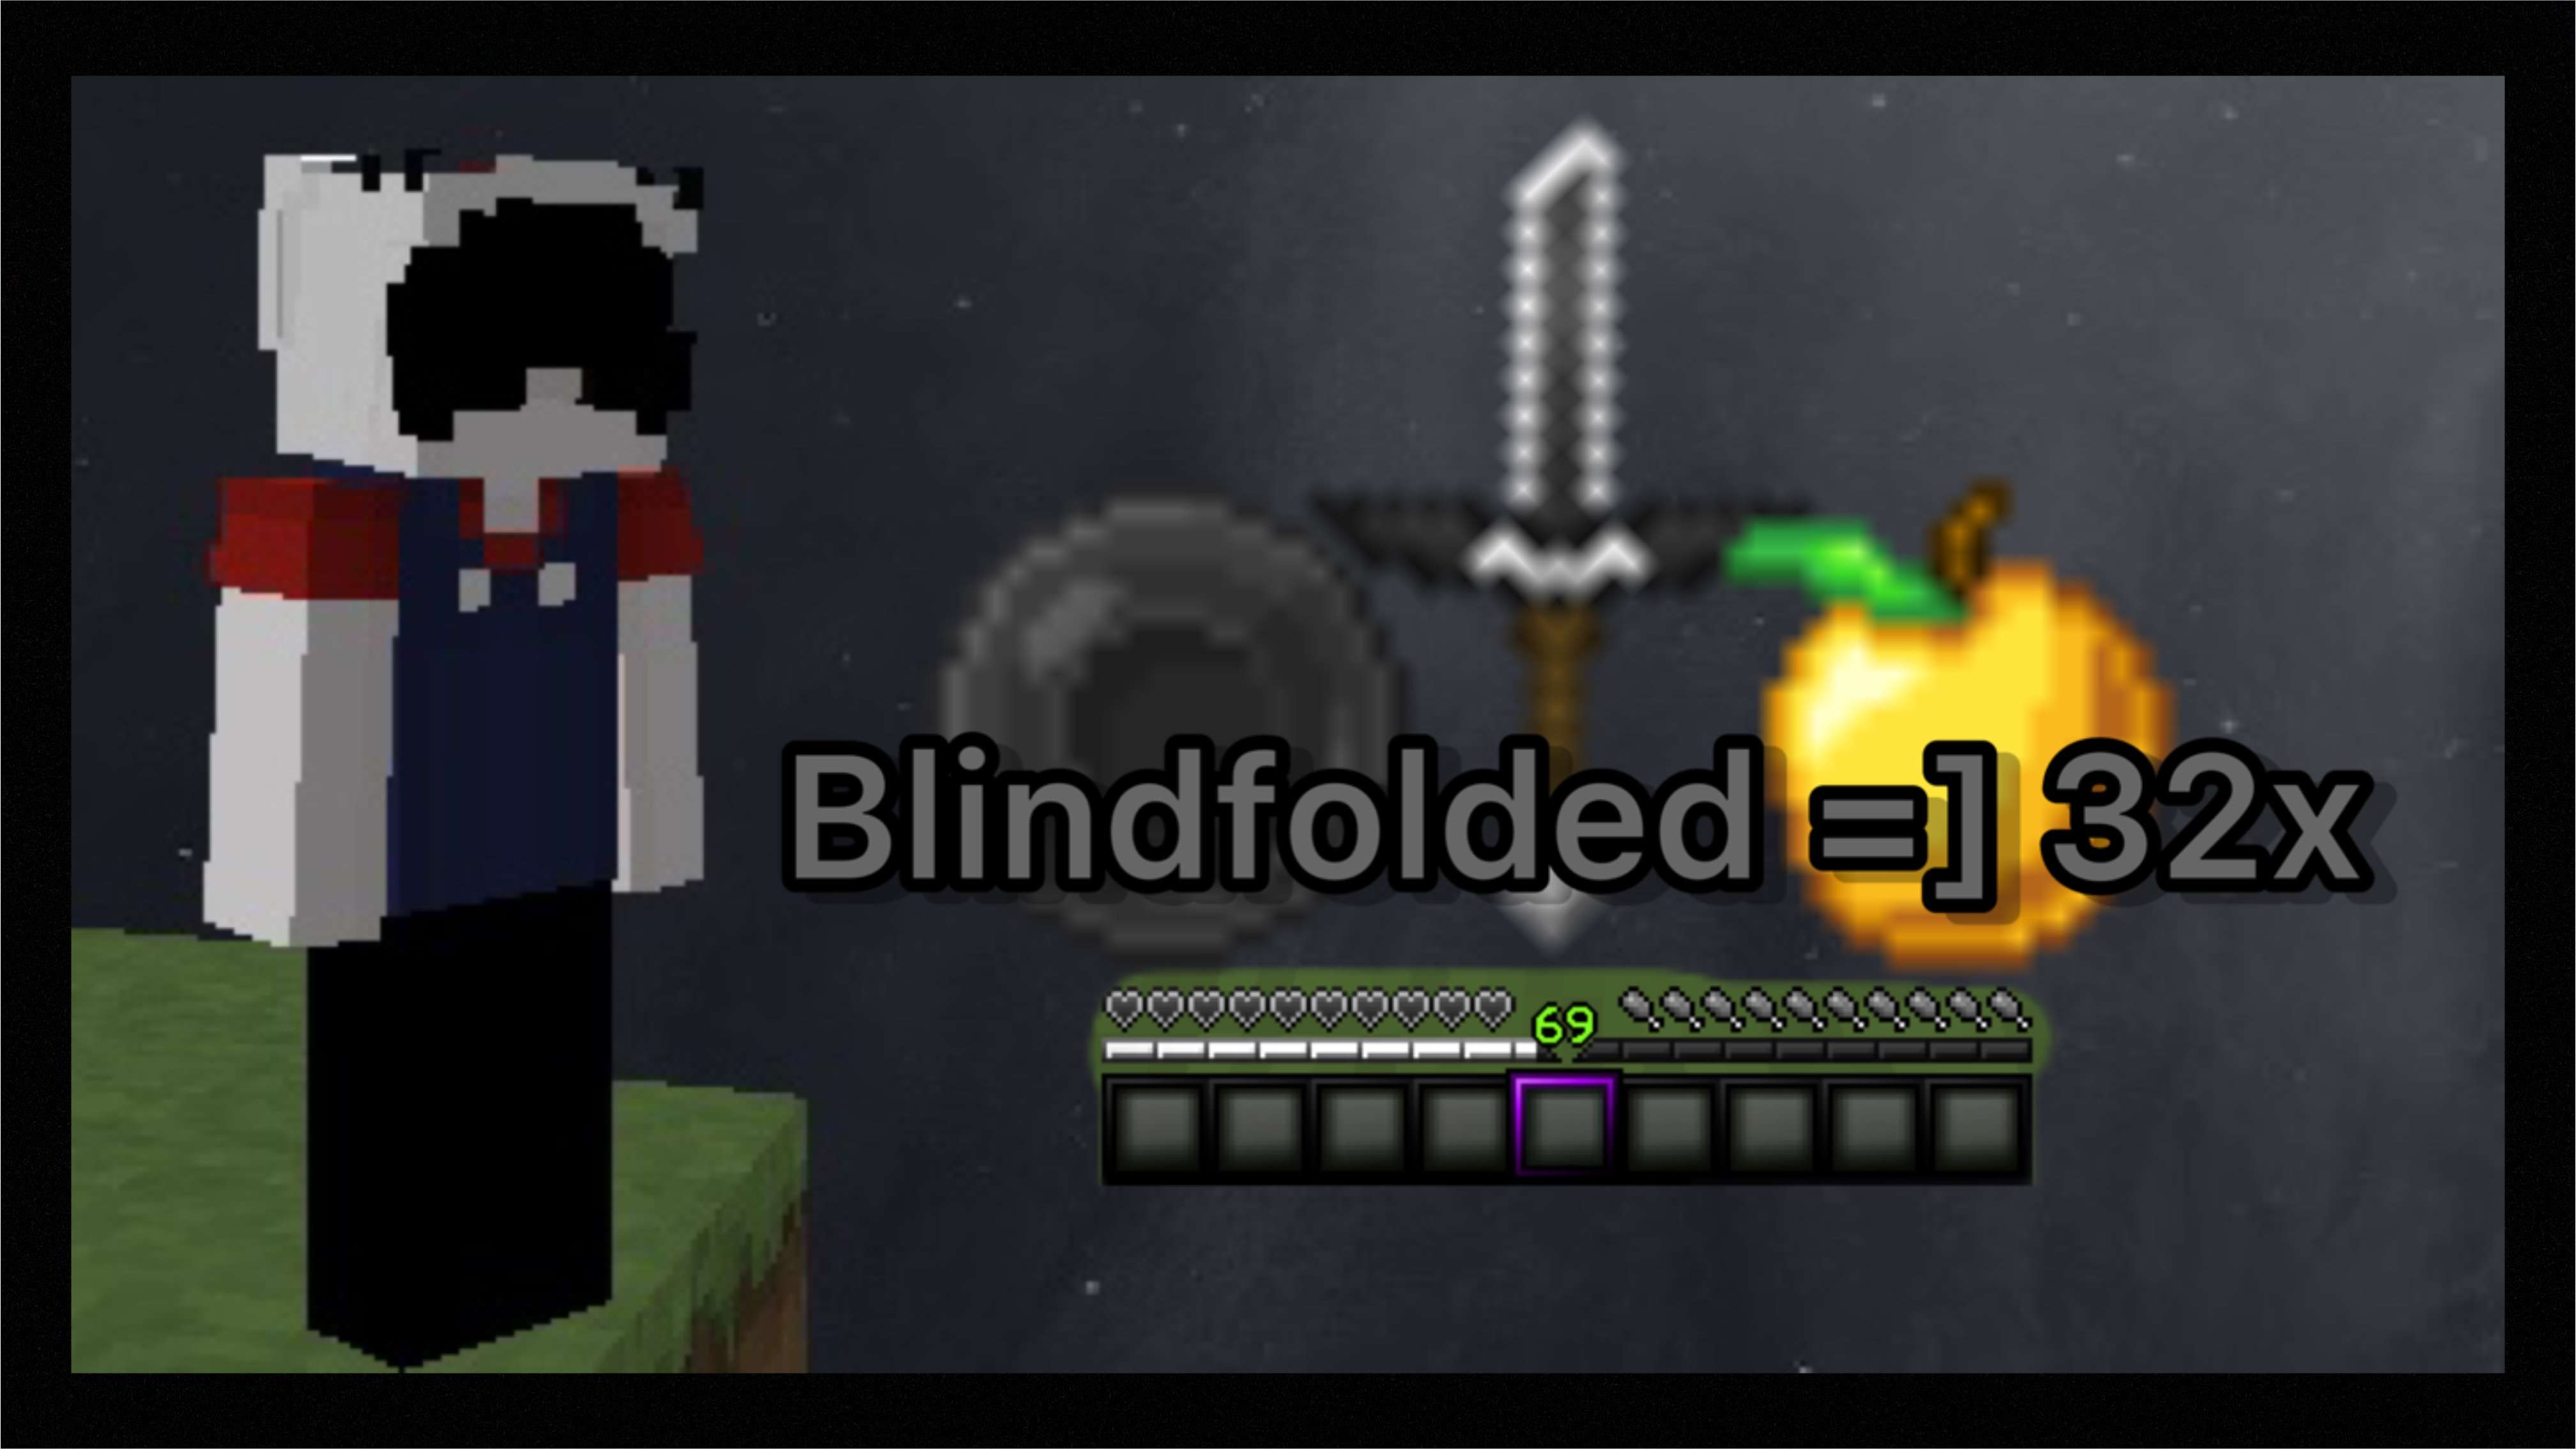 Blindfolded =] 32x by Blindfolded__ on PvPRP